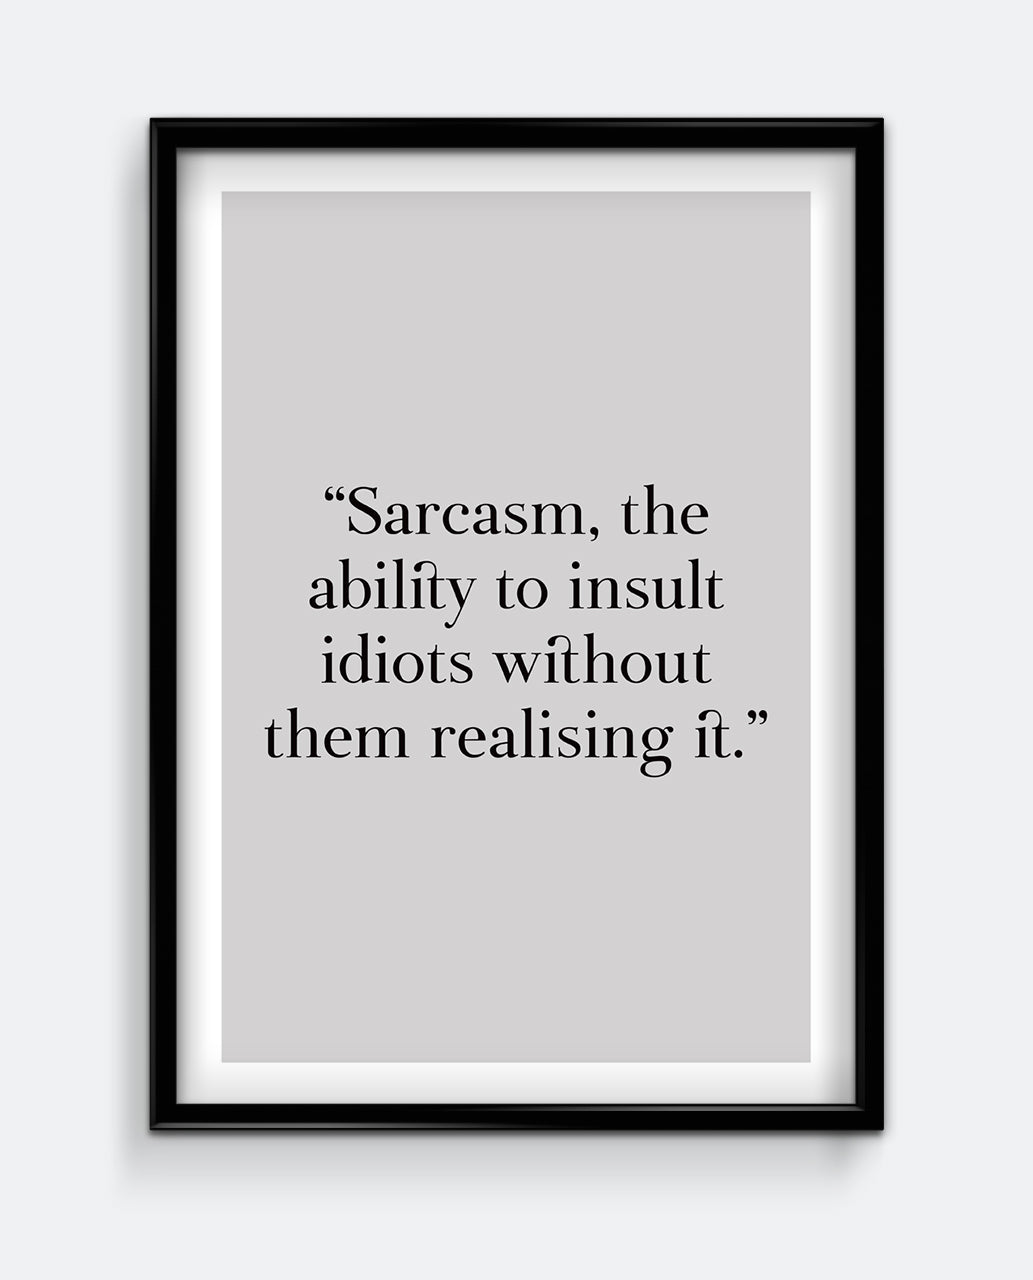 Sarcasm, the ability to insult idiots without them realising it